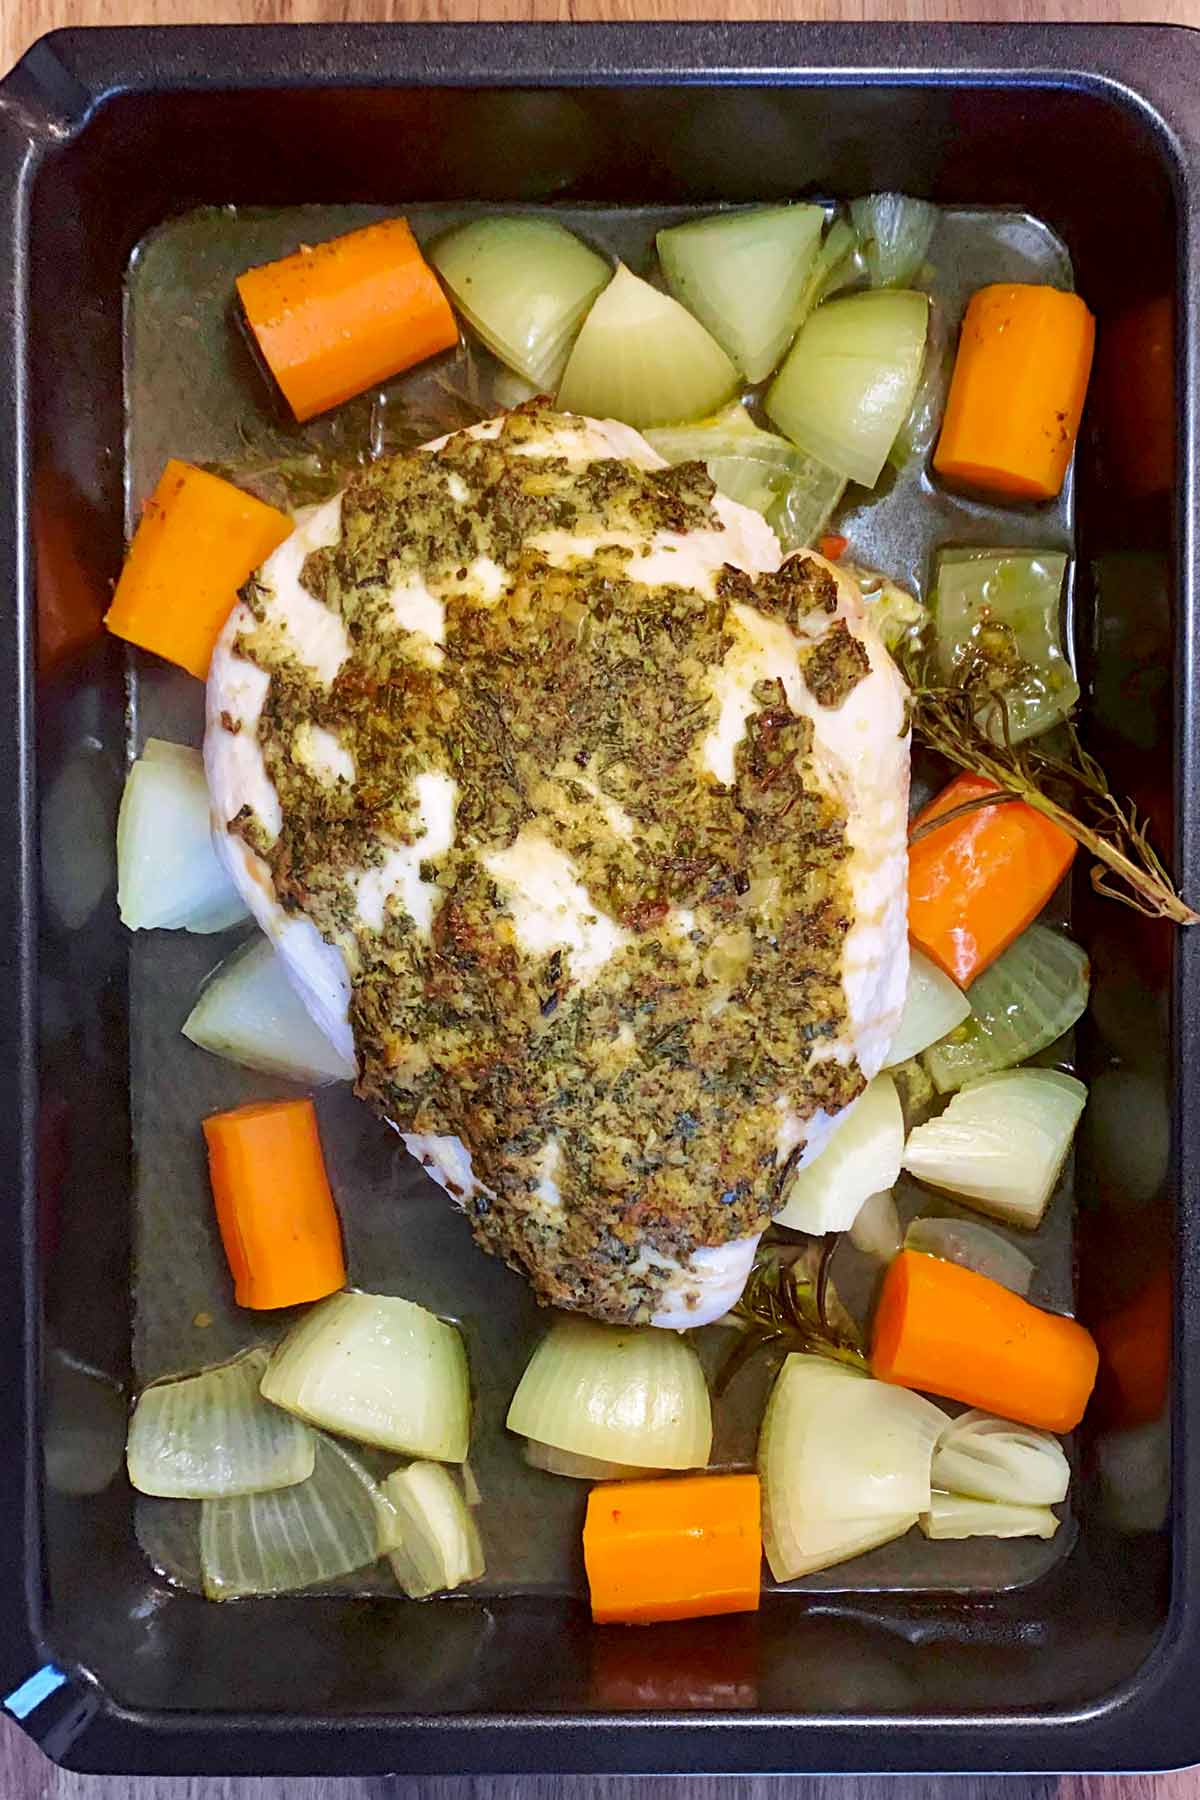 Part cooked turkey breast in a baking tray.